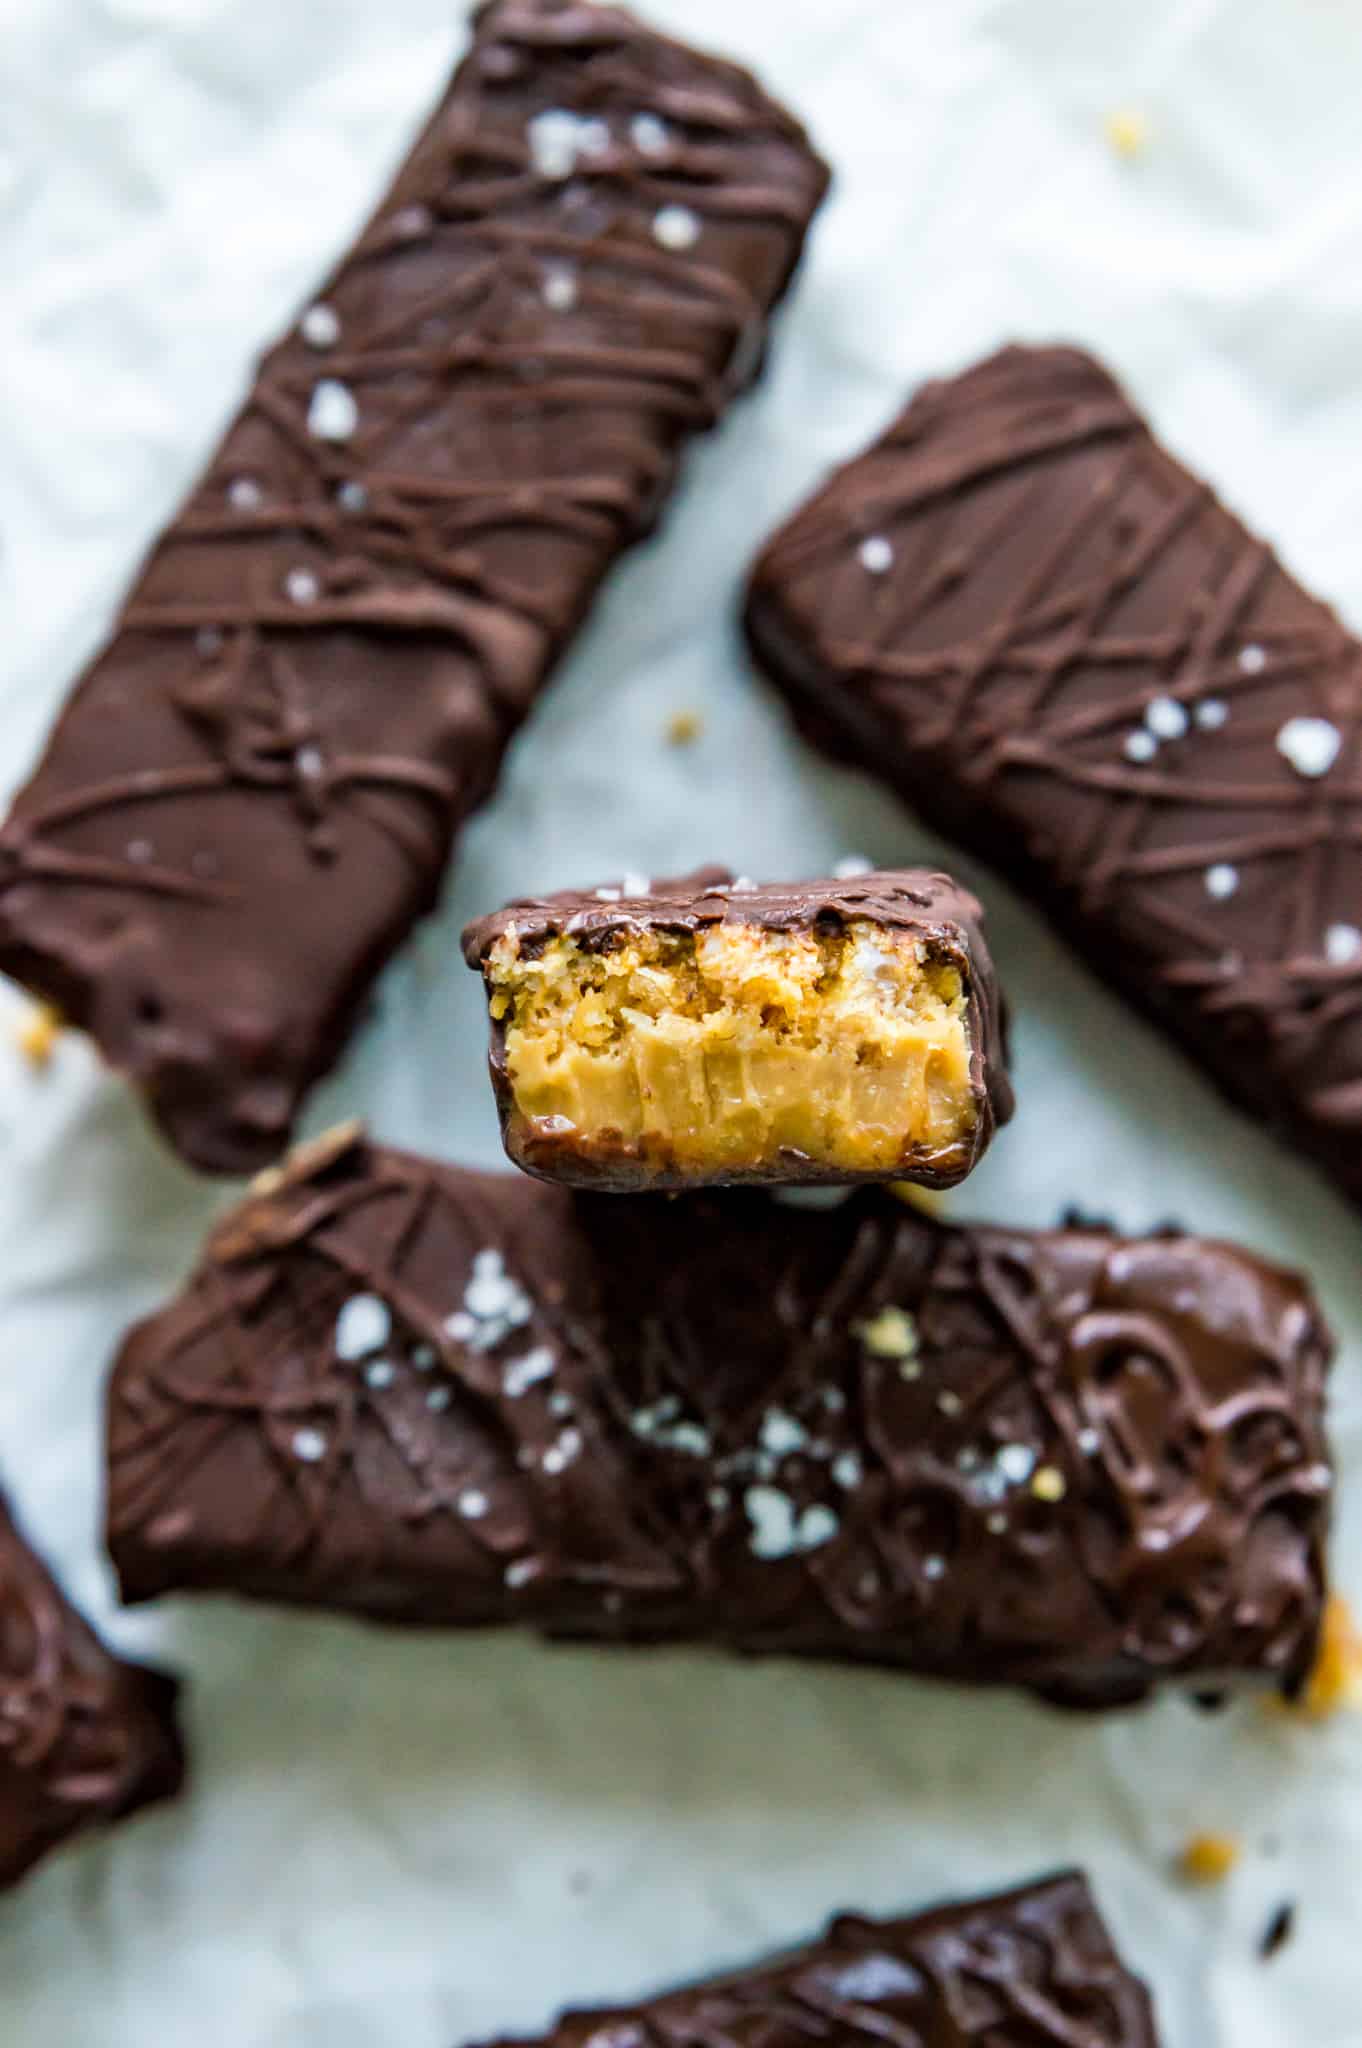 A chocolate peanut butter bar with a bite out of it.